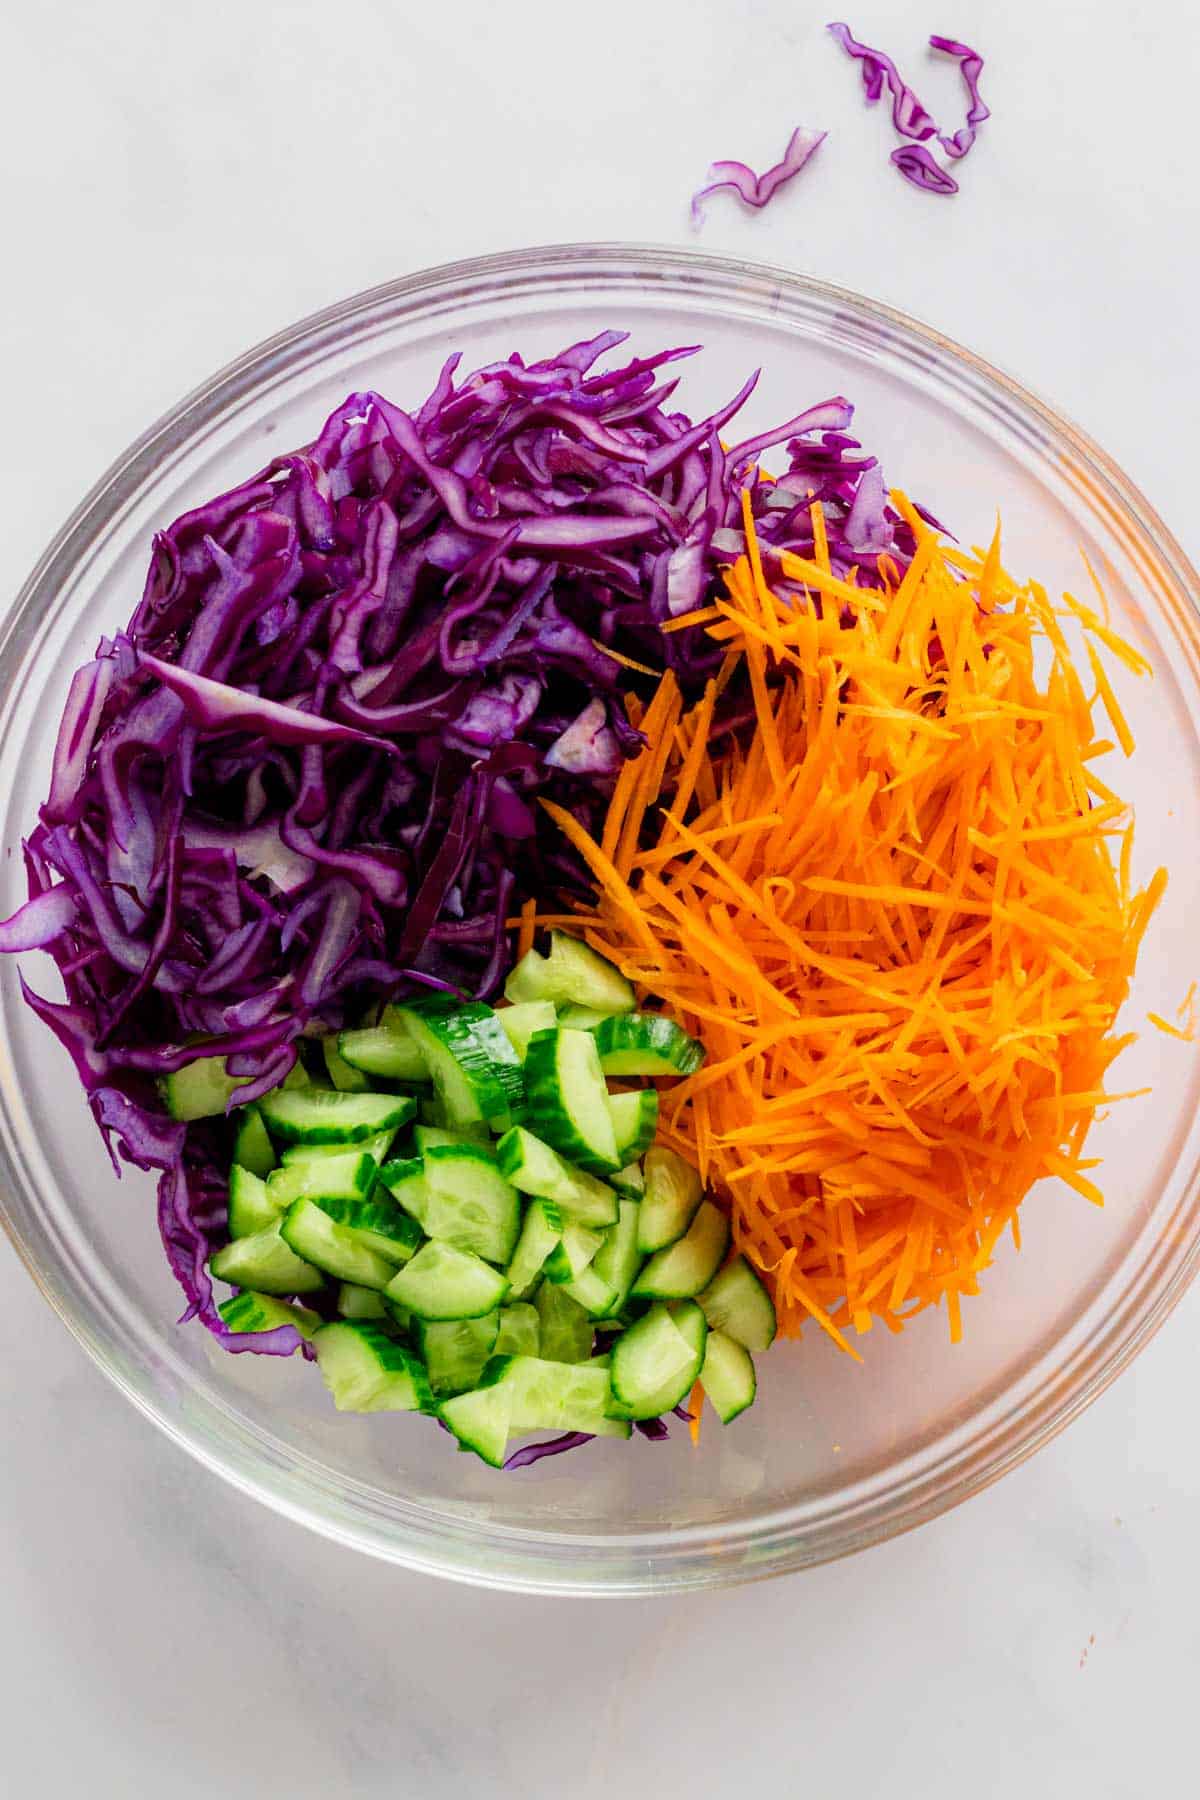 shredded cabbage, carrots and cucumbers in a bowl.